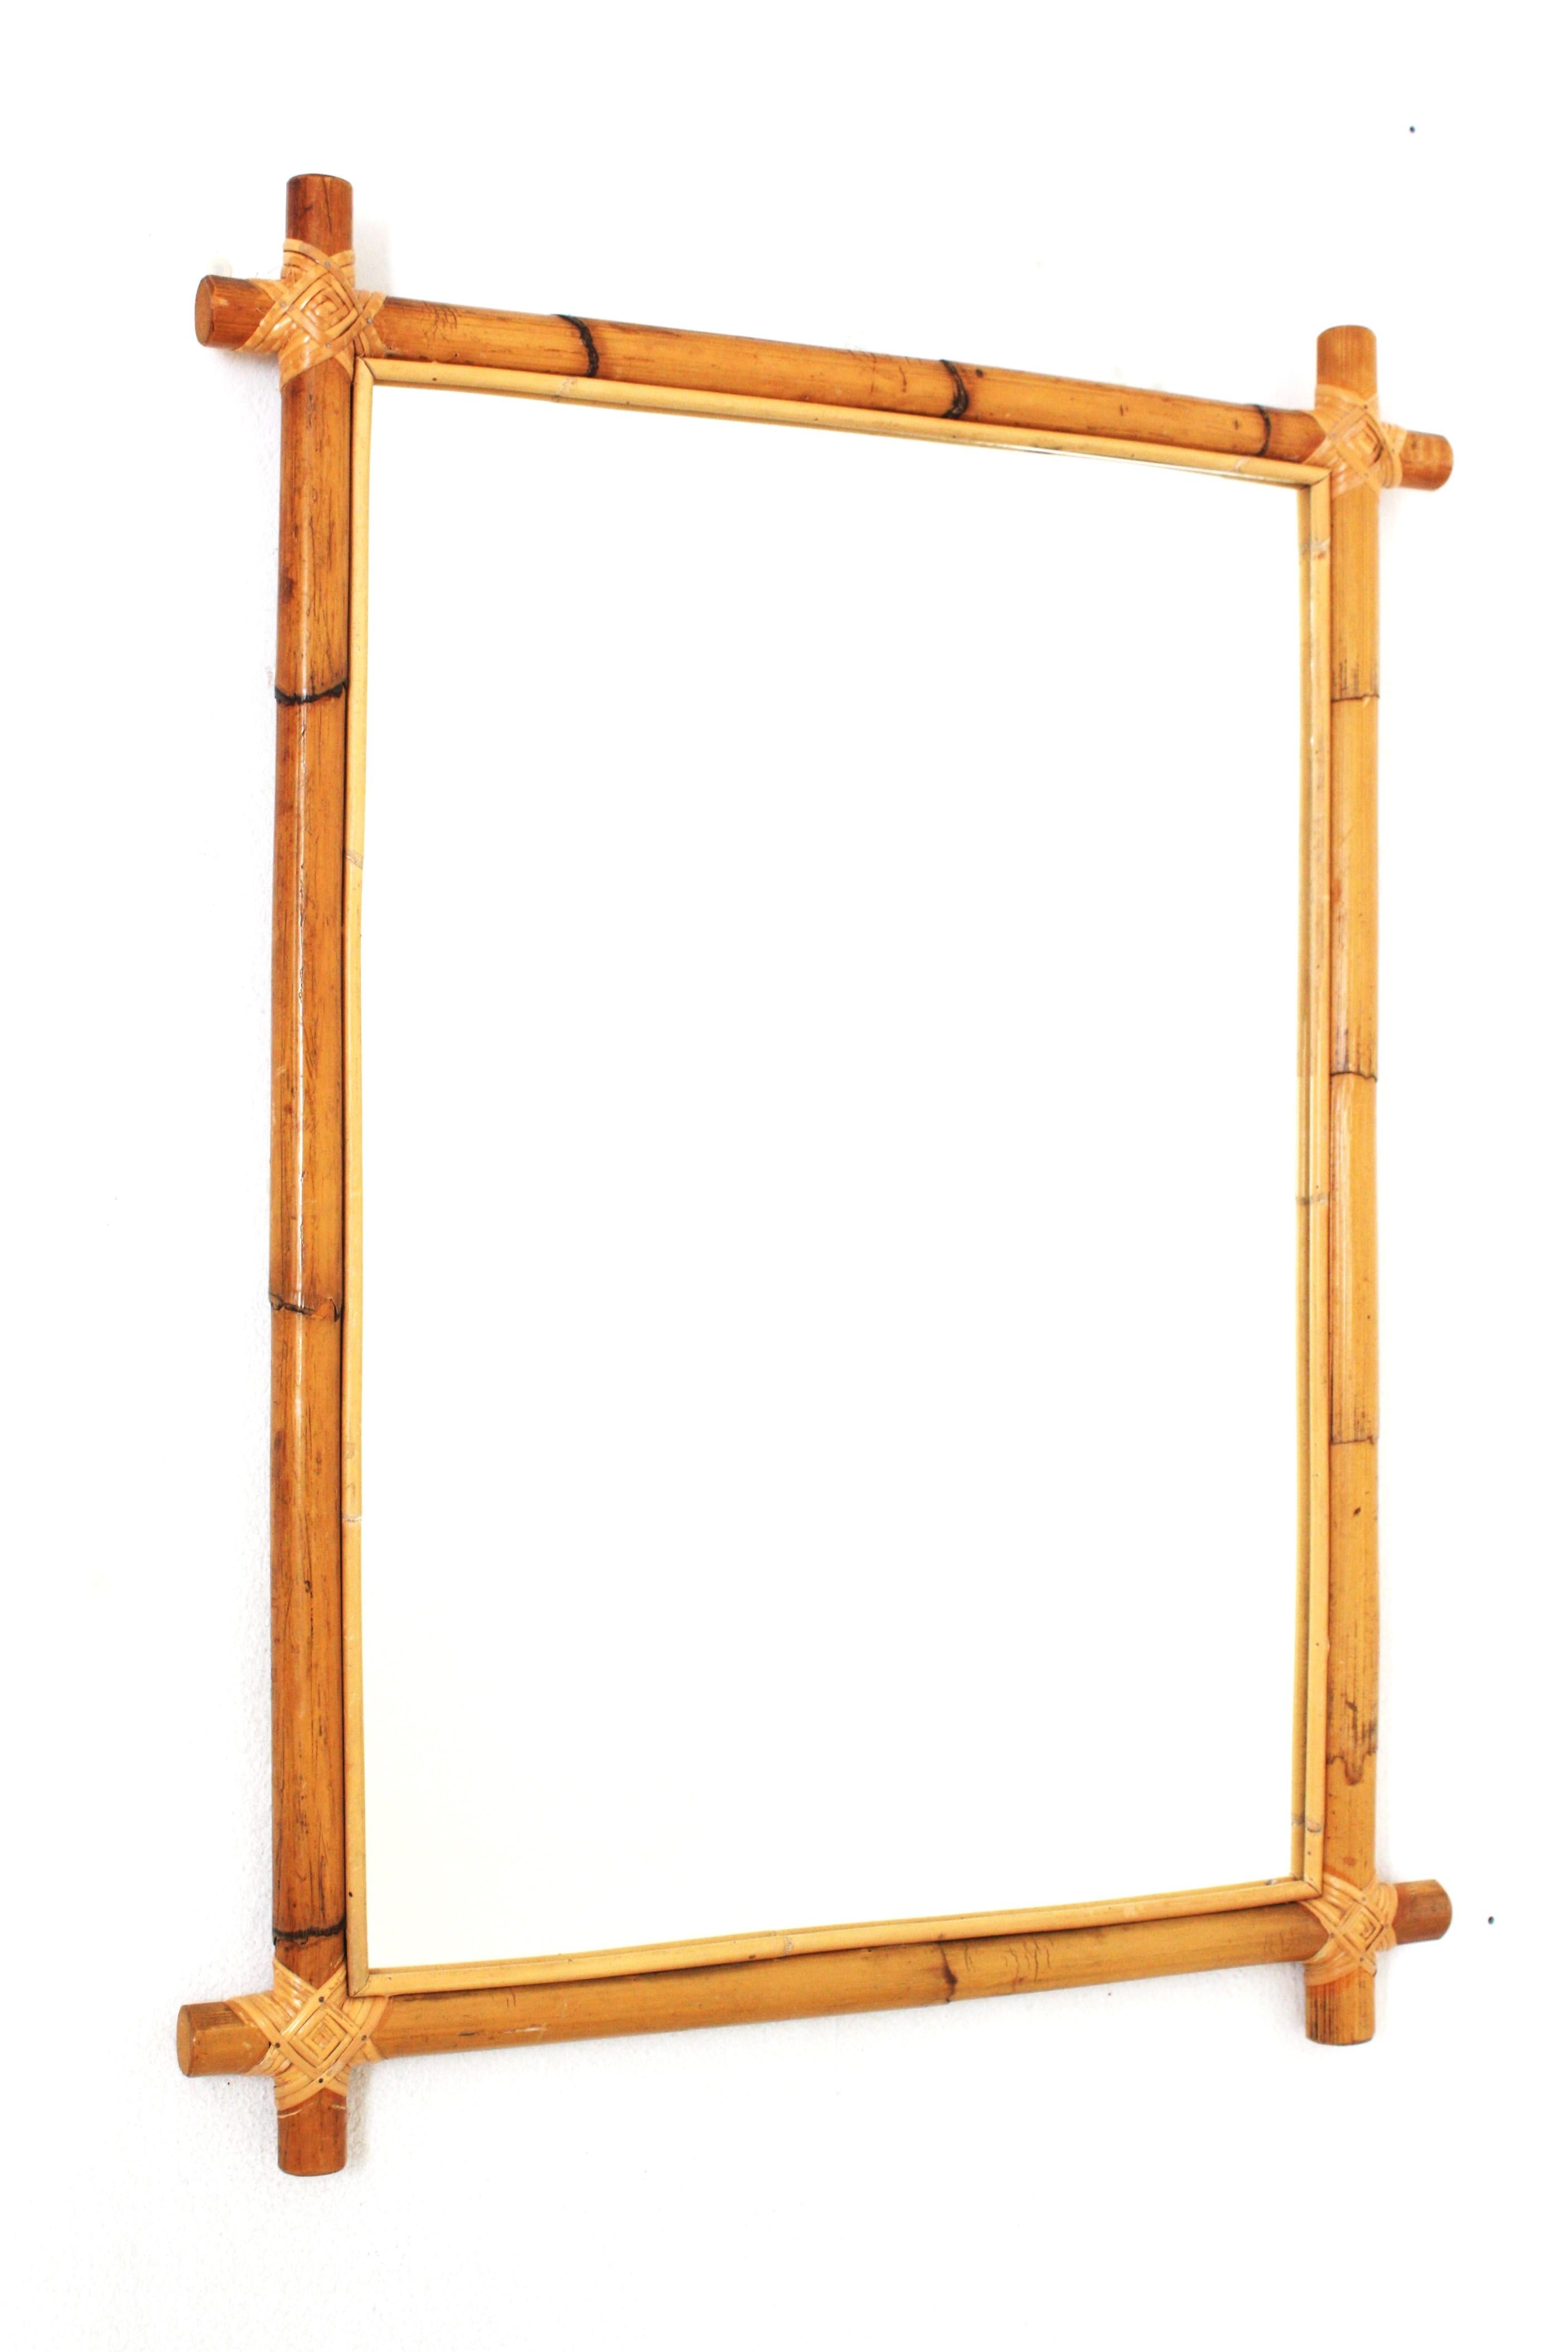 Large Crossed Corners Rectangular wall mirror, bamboo, rattan
Eye-catching rectangular mirror handcrafted with bamboo/ rattan cane. Spain, 1960s.
Inspired in JM Frank designs
This mirror features a rattan rectangular frame with intersecting corners